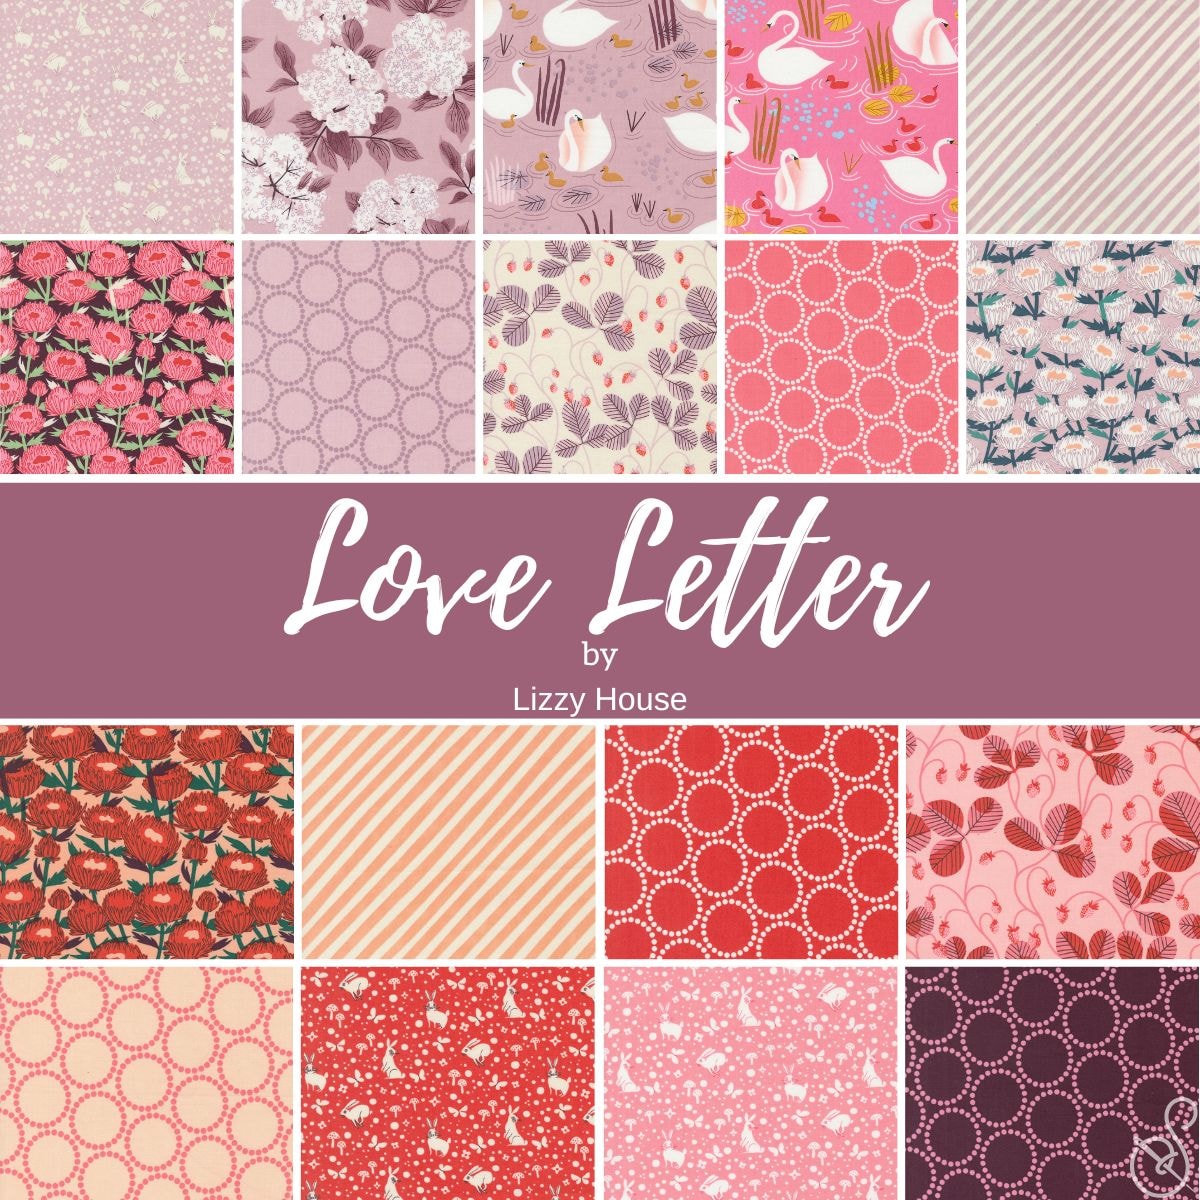 Love Letter Half Yard Bundle | Lizzy House - Pink/Red Colorway 18 HYs